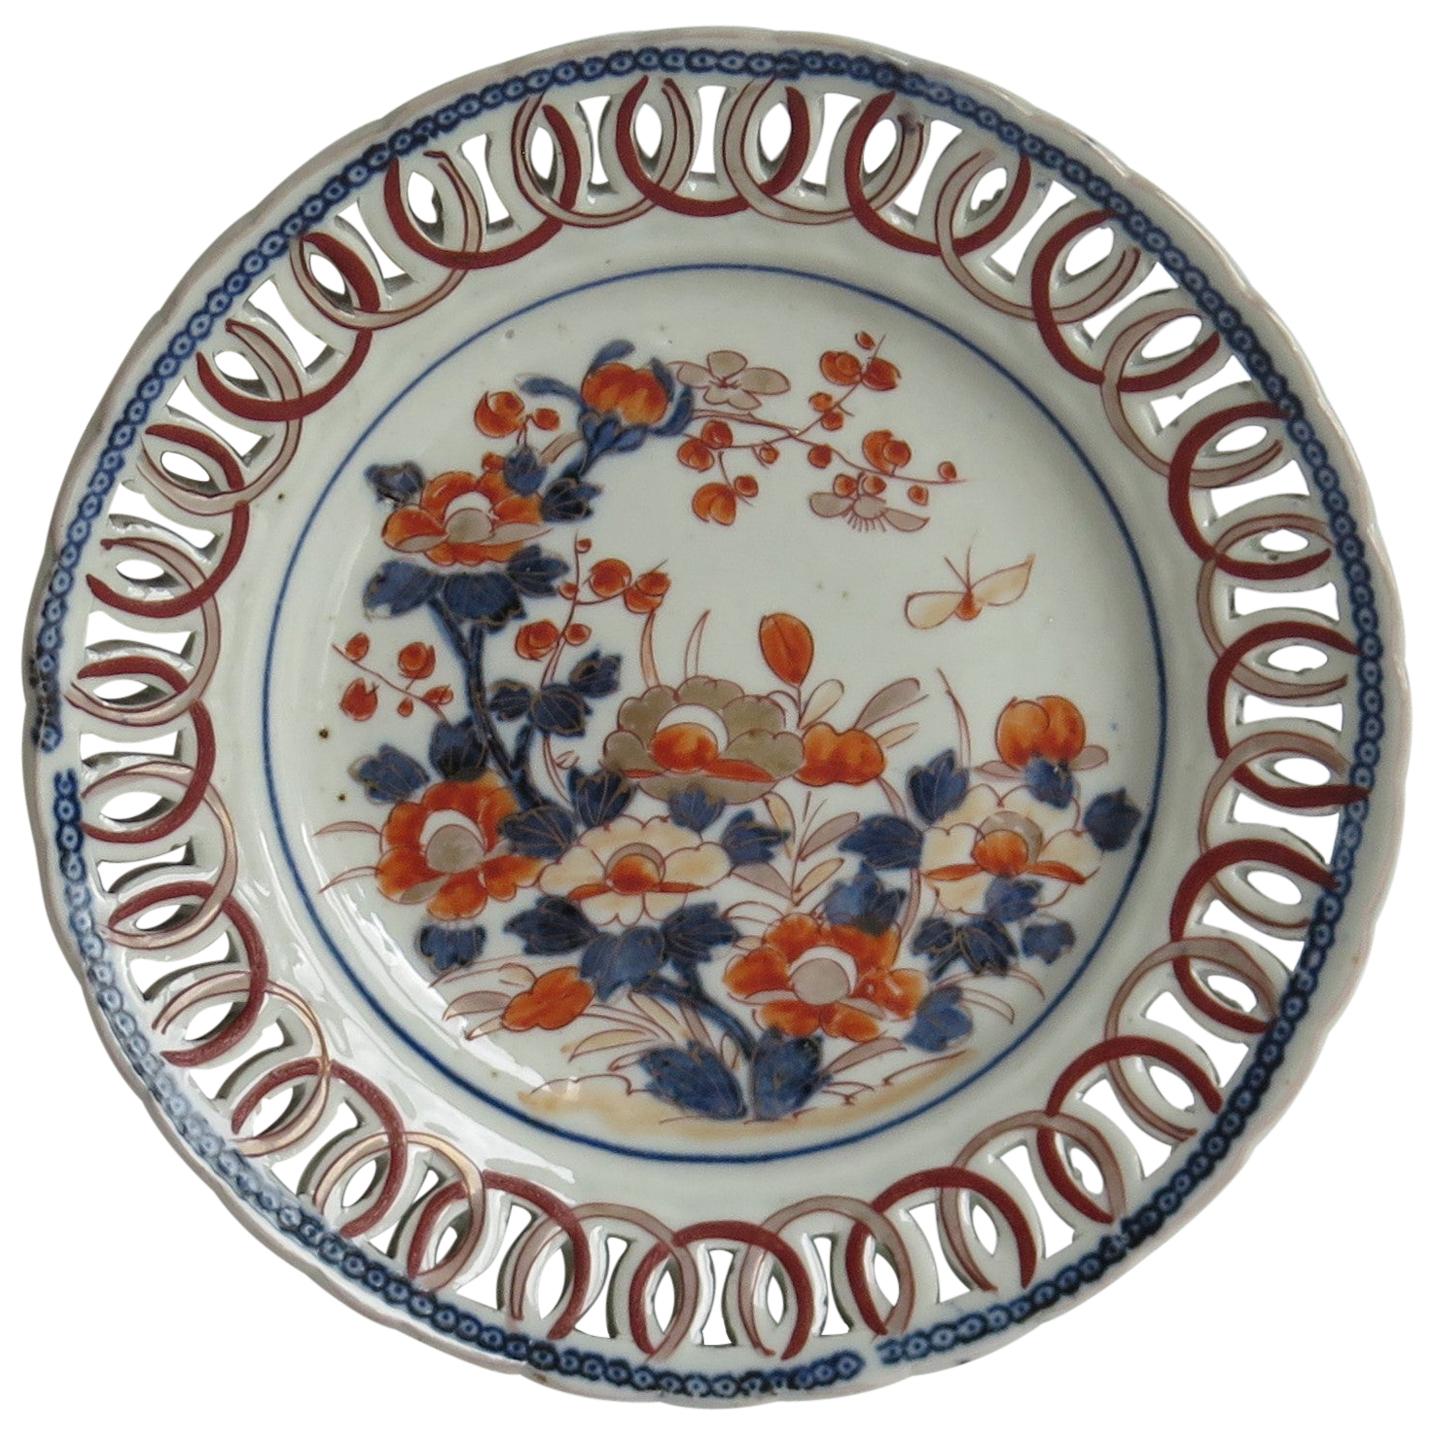 Japanese Porcelain Reticulated Plate or Dish Hand Painted, Edo Period circa 1820